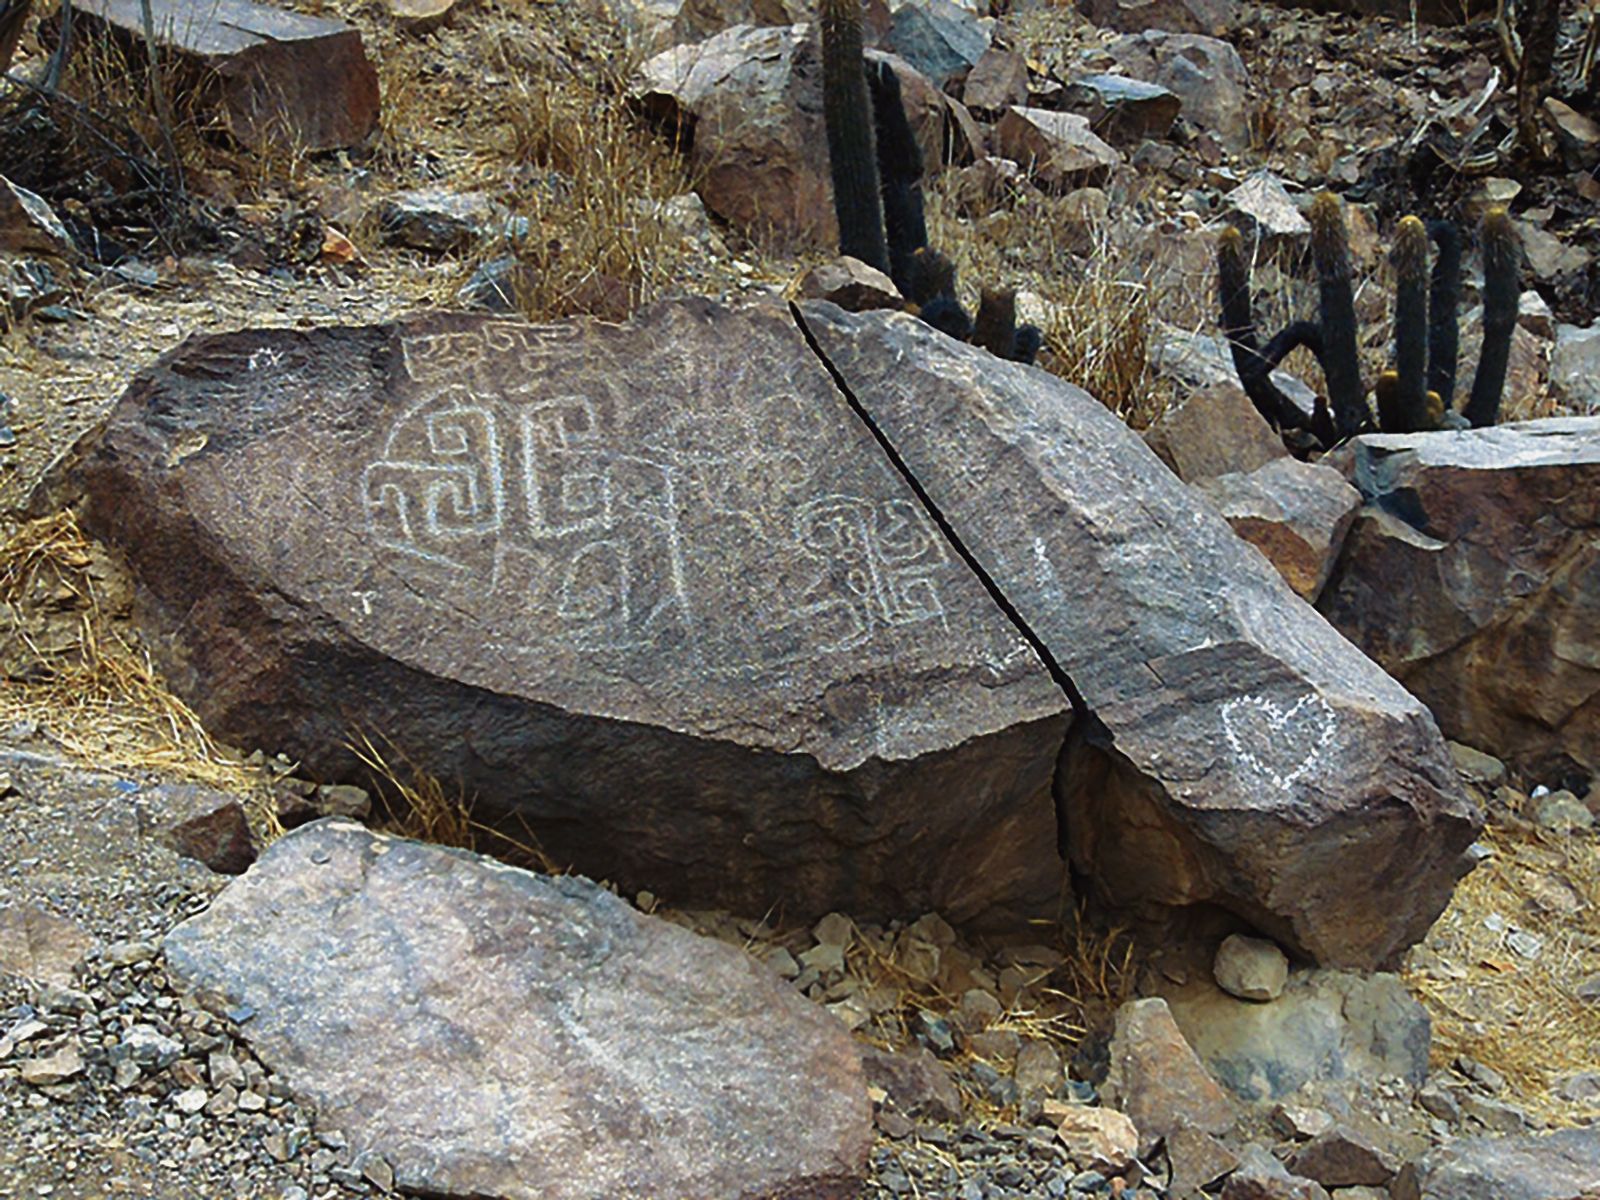 Rock Art Checta Archaeological Archaeology Site of Canta Lima Peru South America